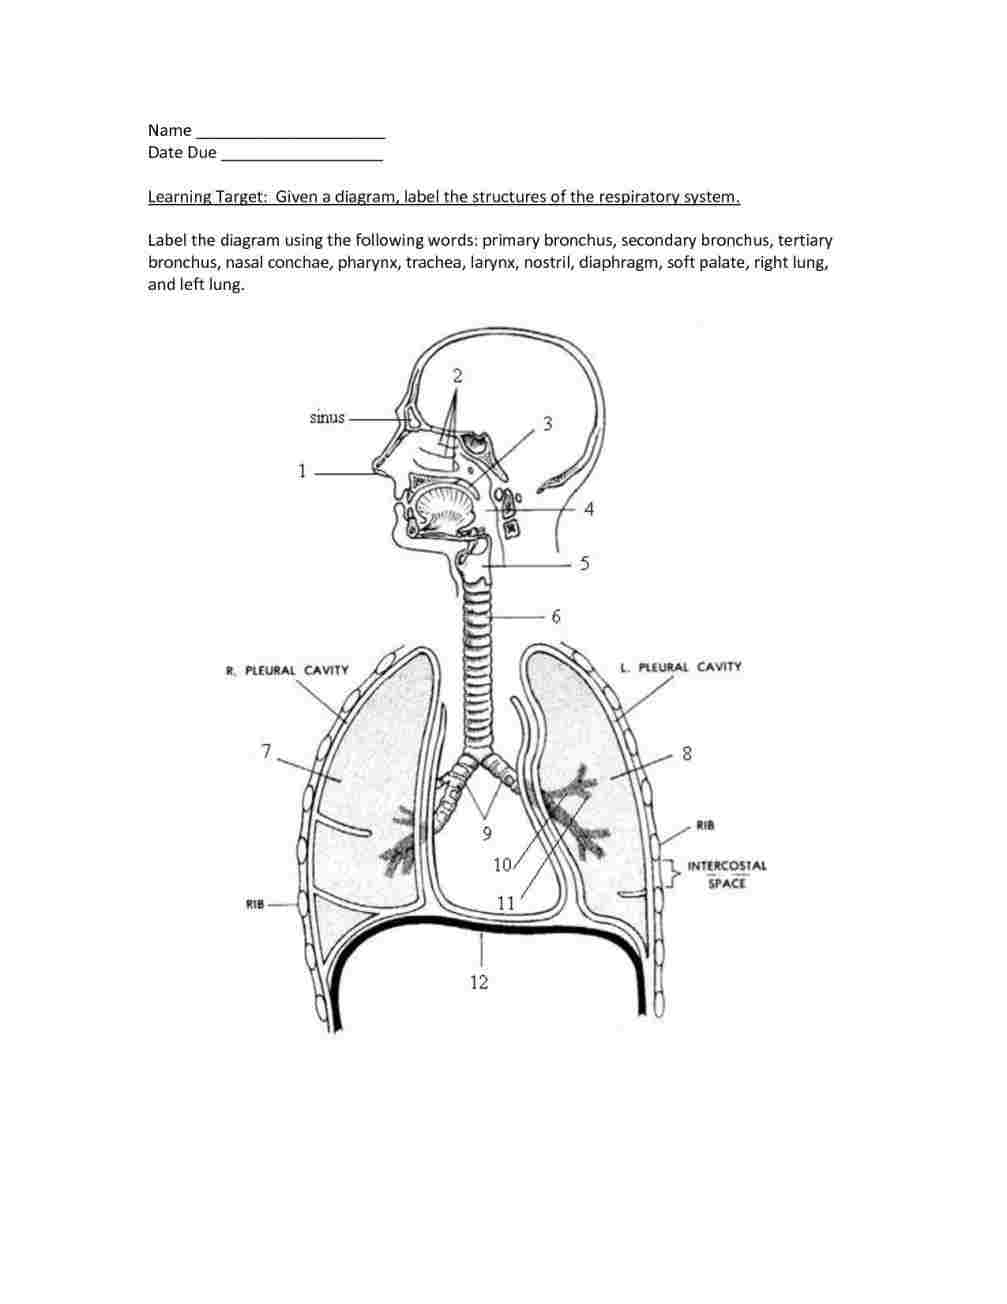 Diagram Of The Respiratory System Diagram Of Respiratory System Diagram Of Anatomy